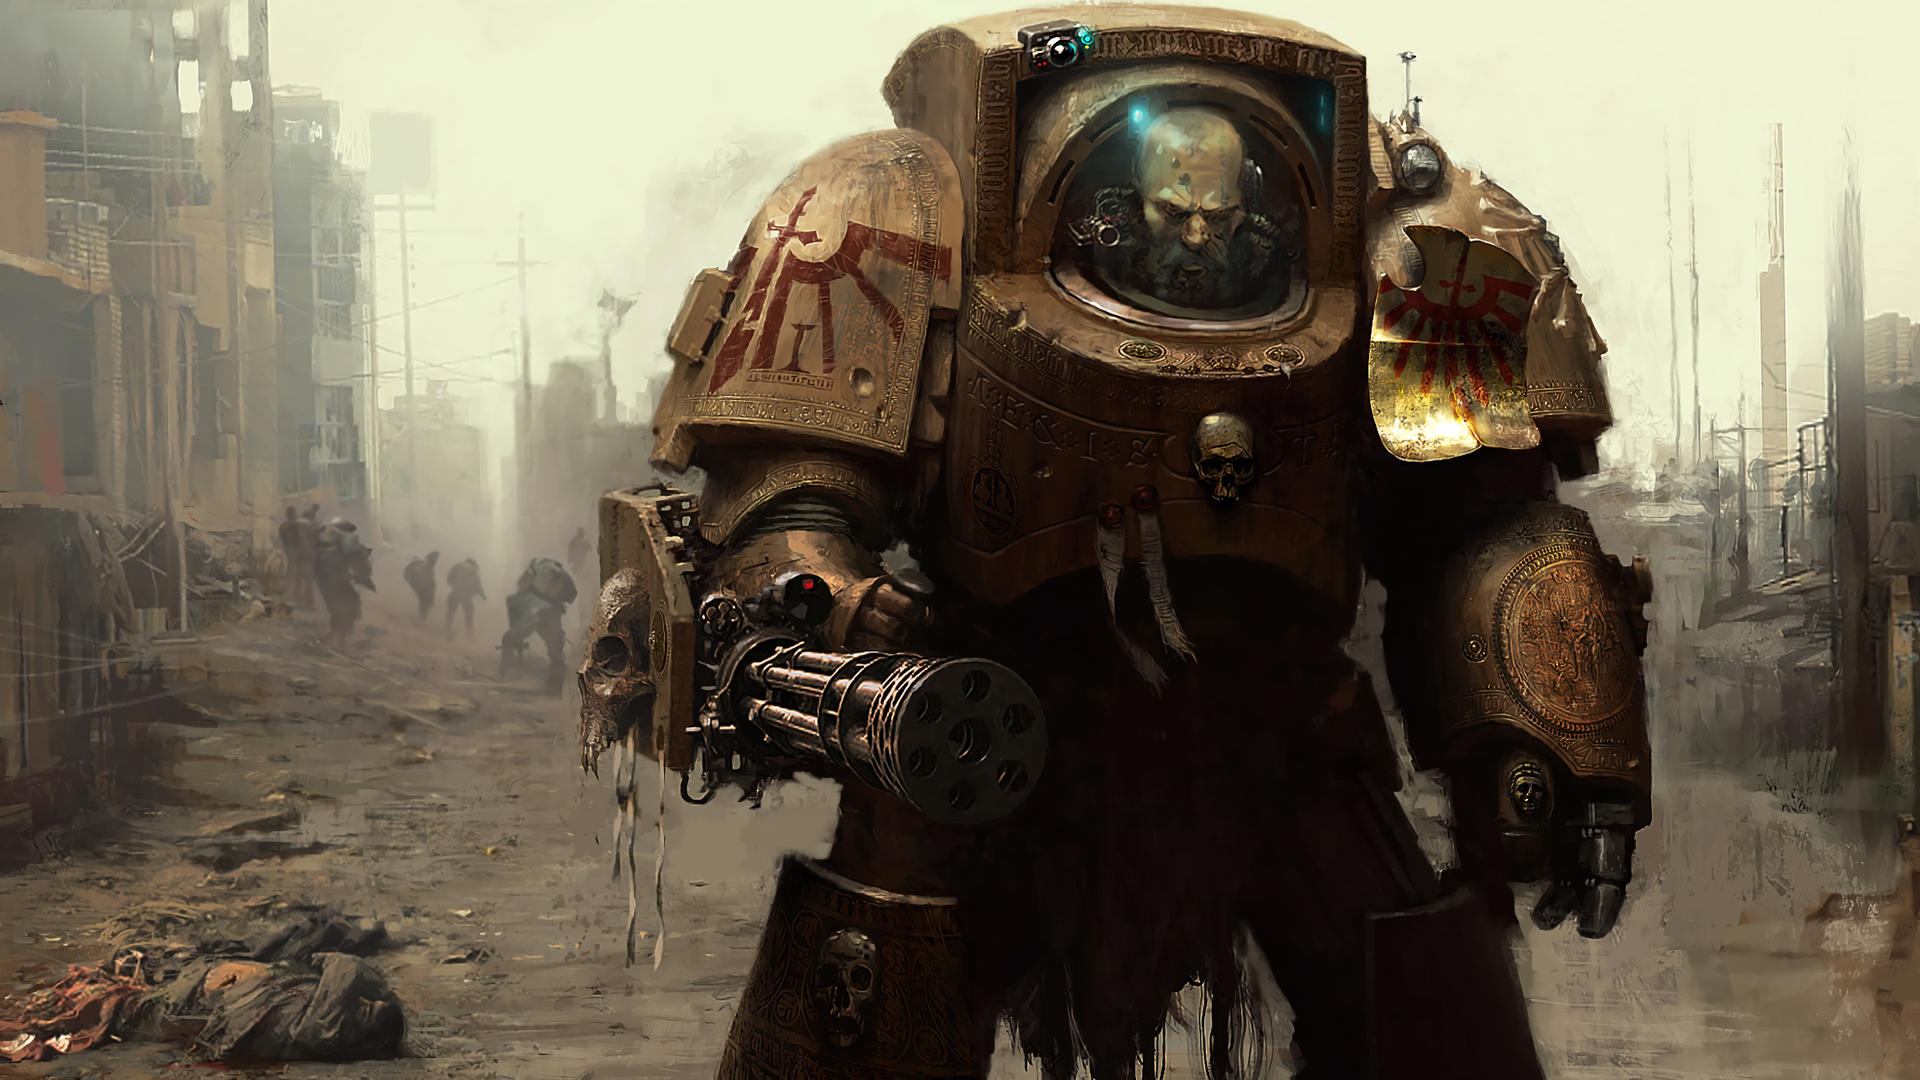 General 1920x1080 Warhammer 40,000 digital art space marines Deathwing science fiction vehicle weapon futuristic armor futuristic